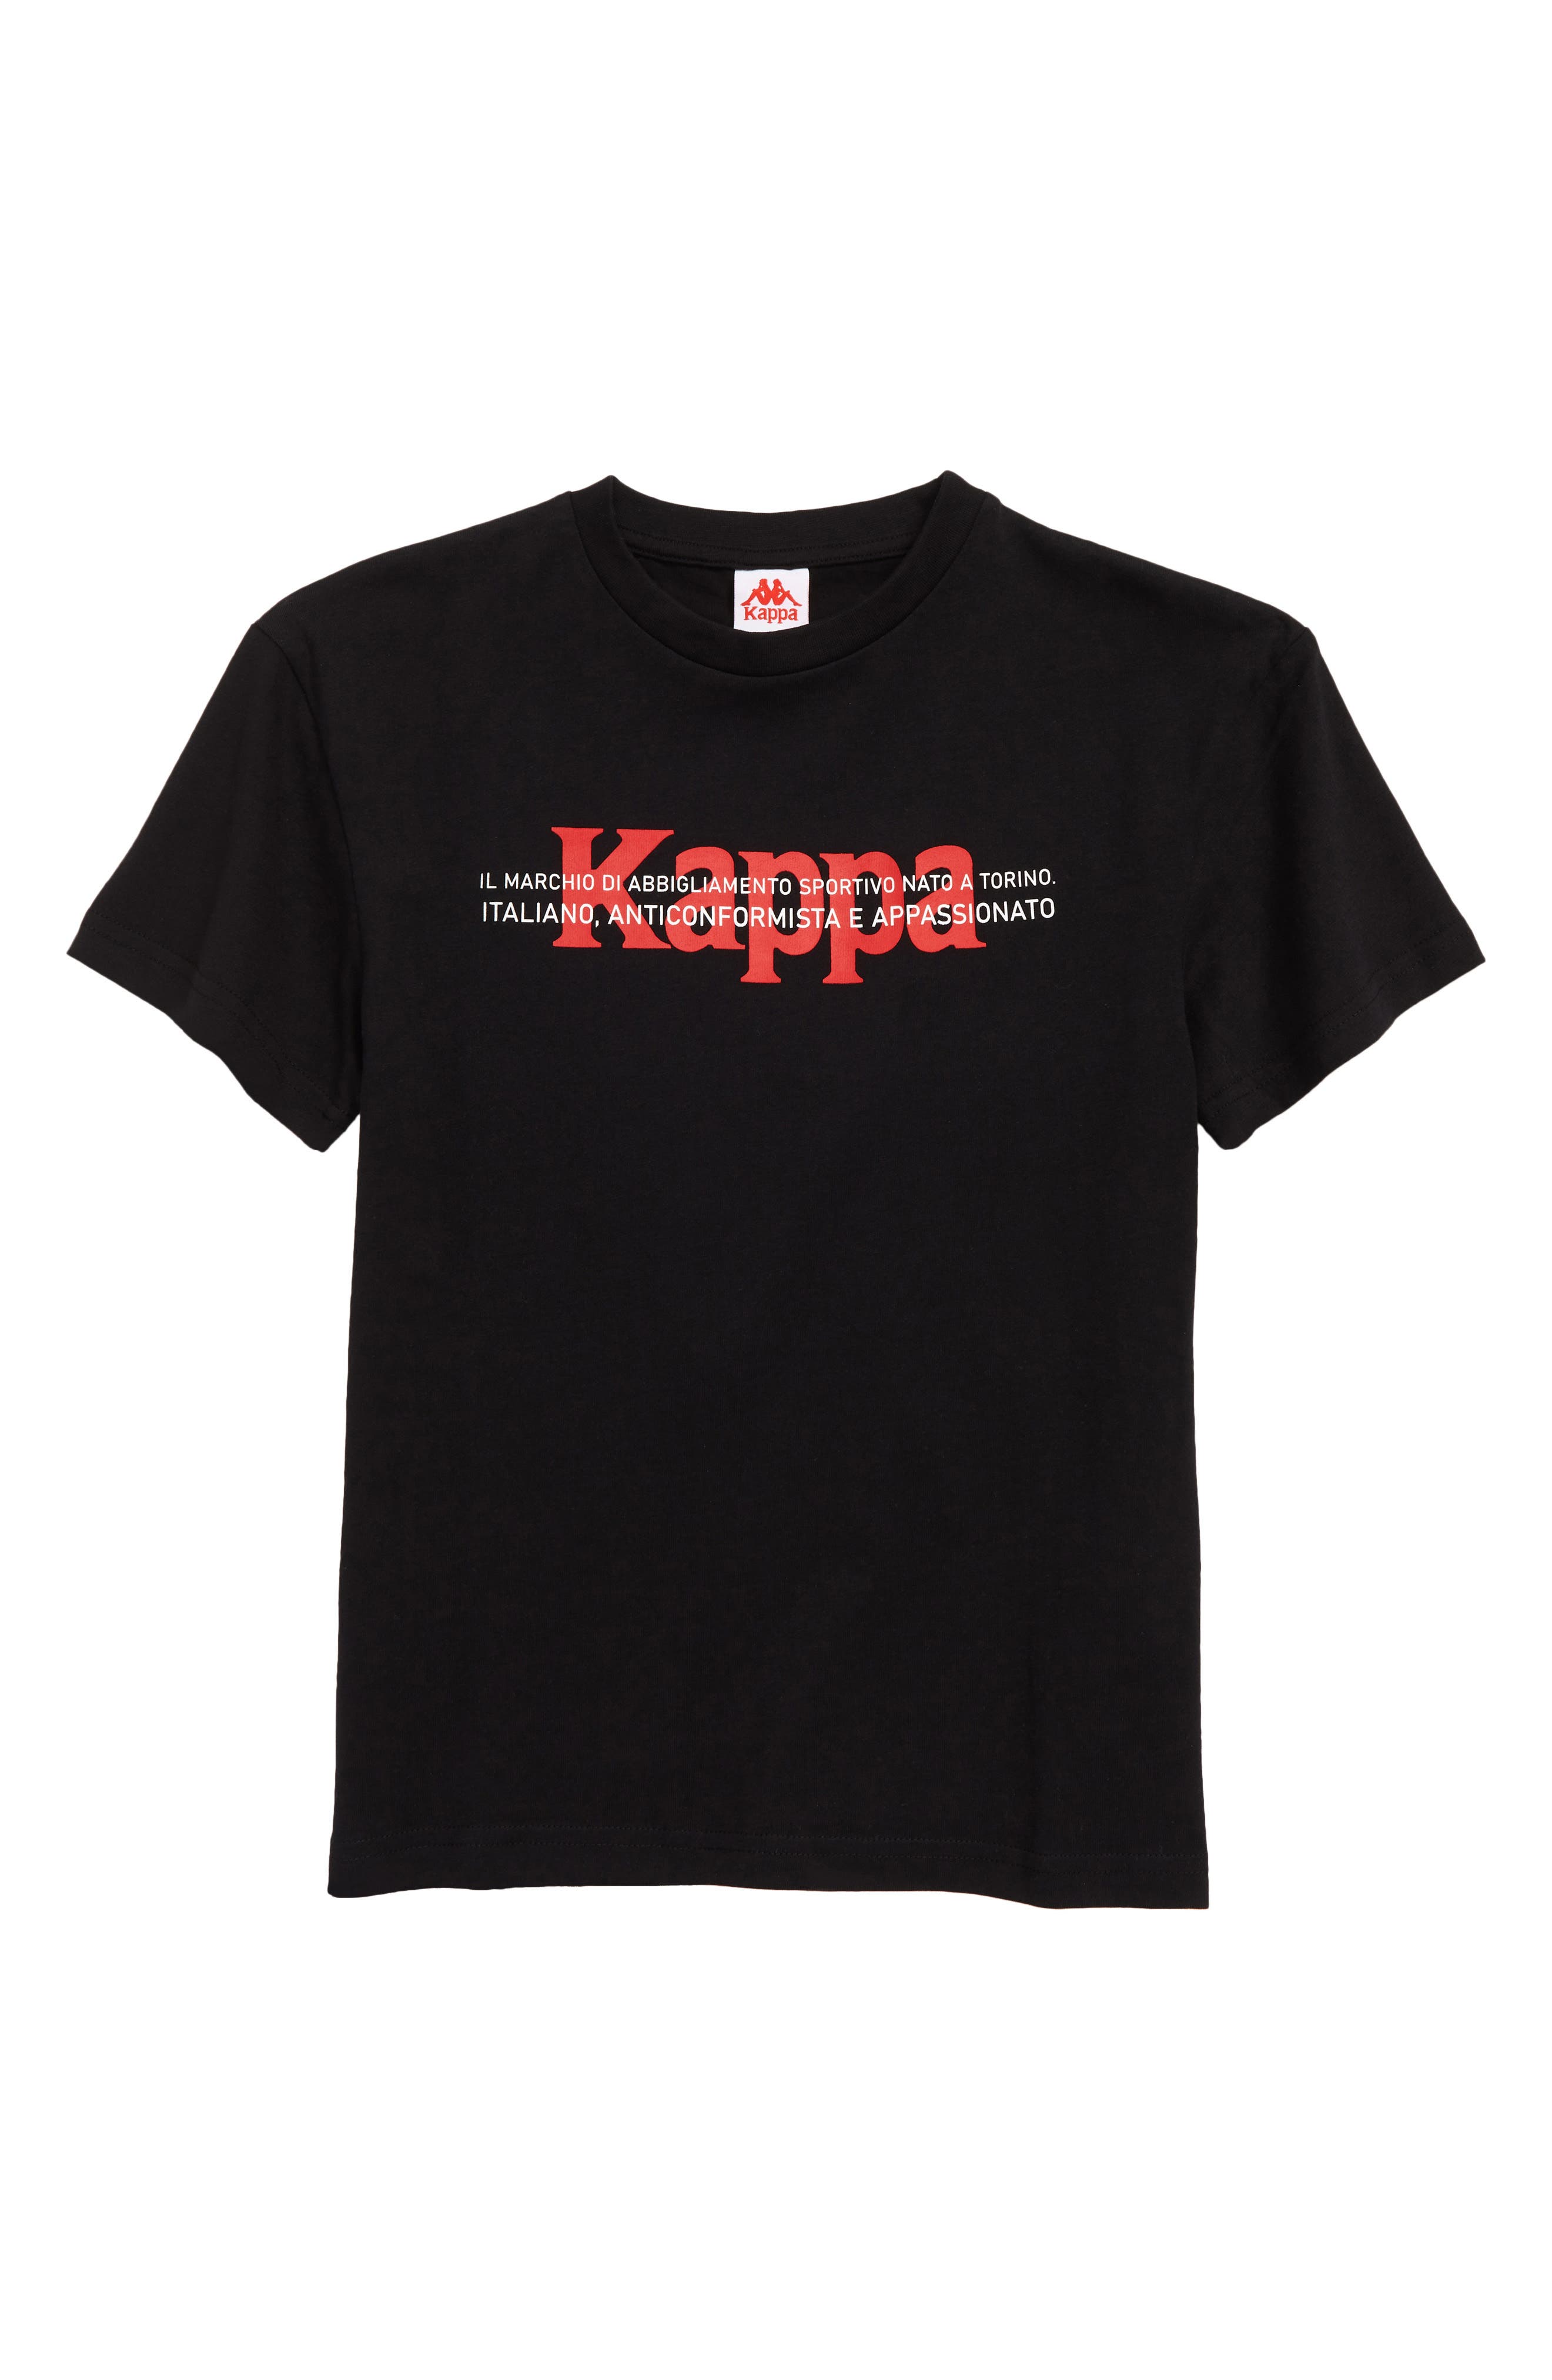 Kappa Authentic Logo Crewneck Tee in Black-Red Md at Nordstrom, Size 10Y Us